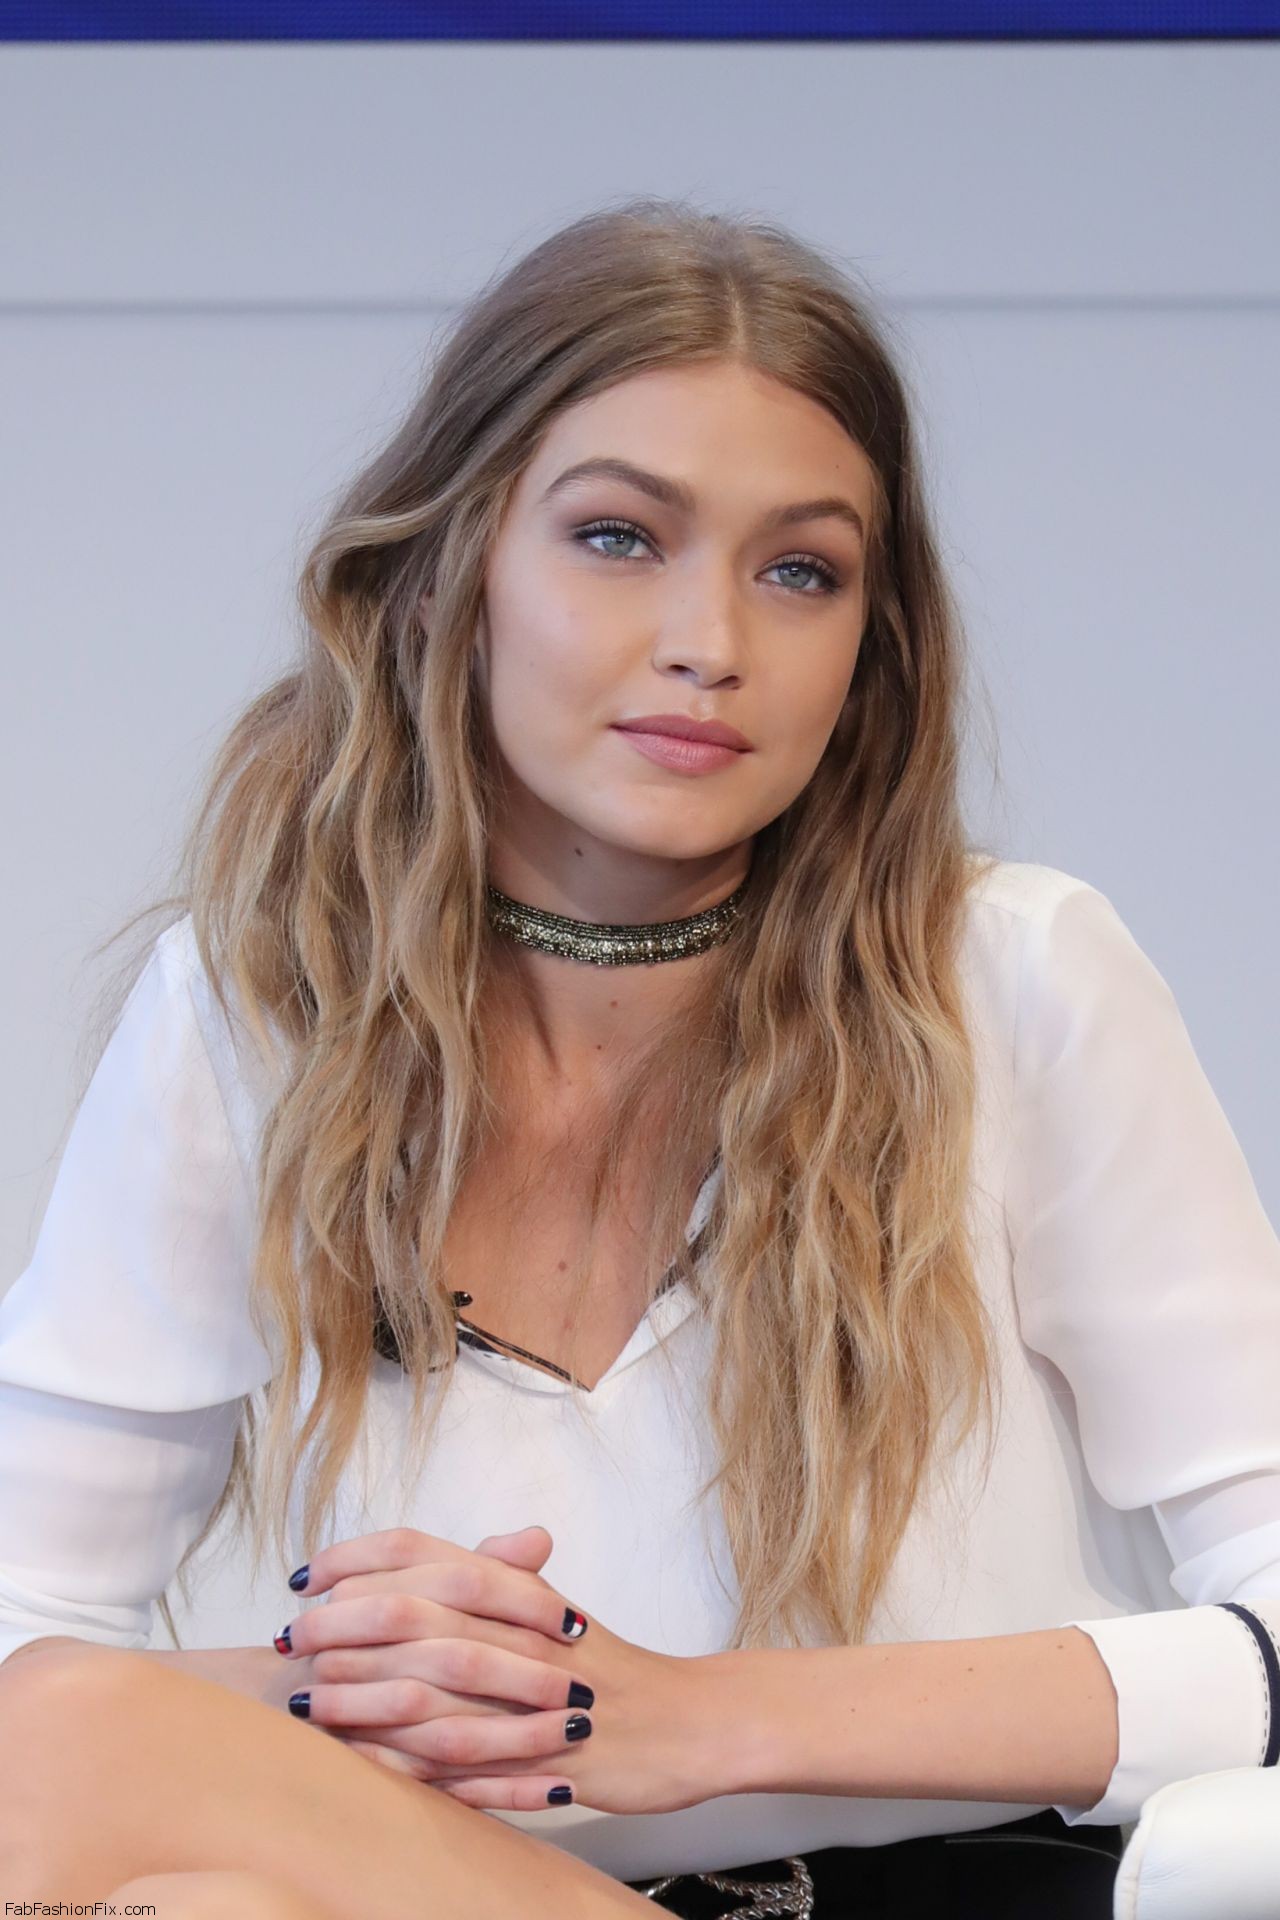 gigi-hadid-tommy-x-gigi-collection-press-conference-in-new-york-city-9-9-2016-1